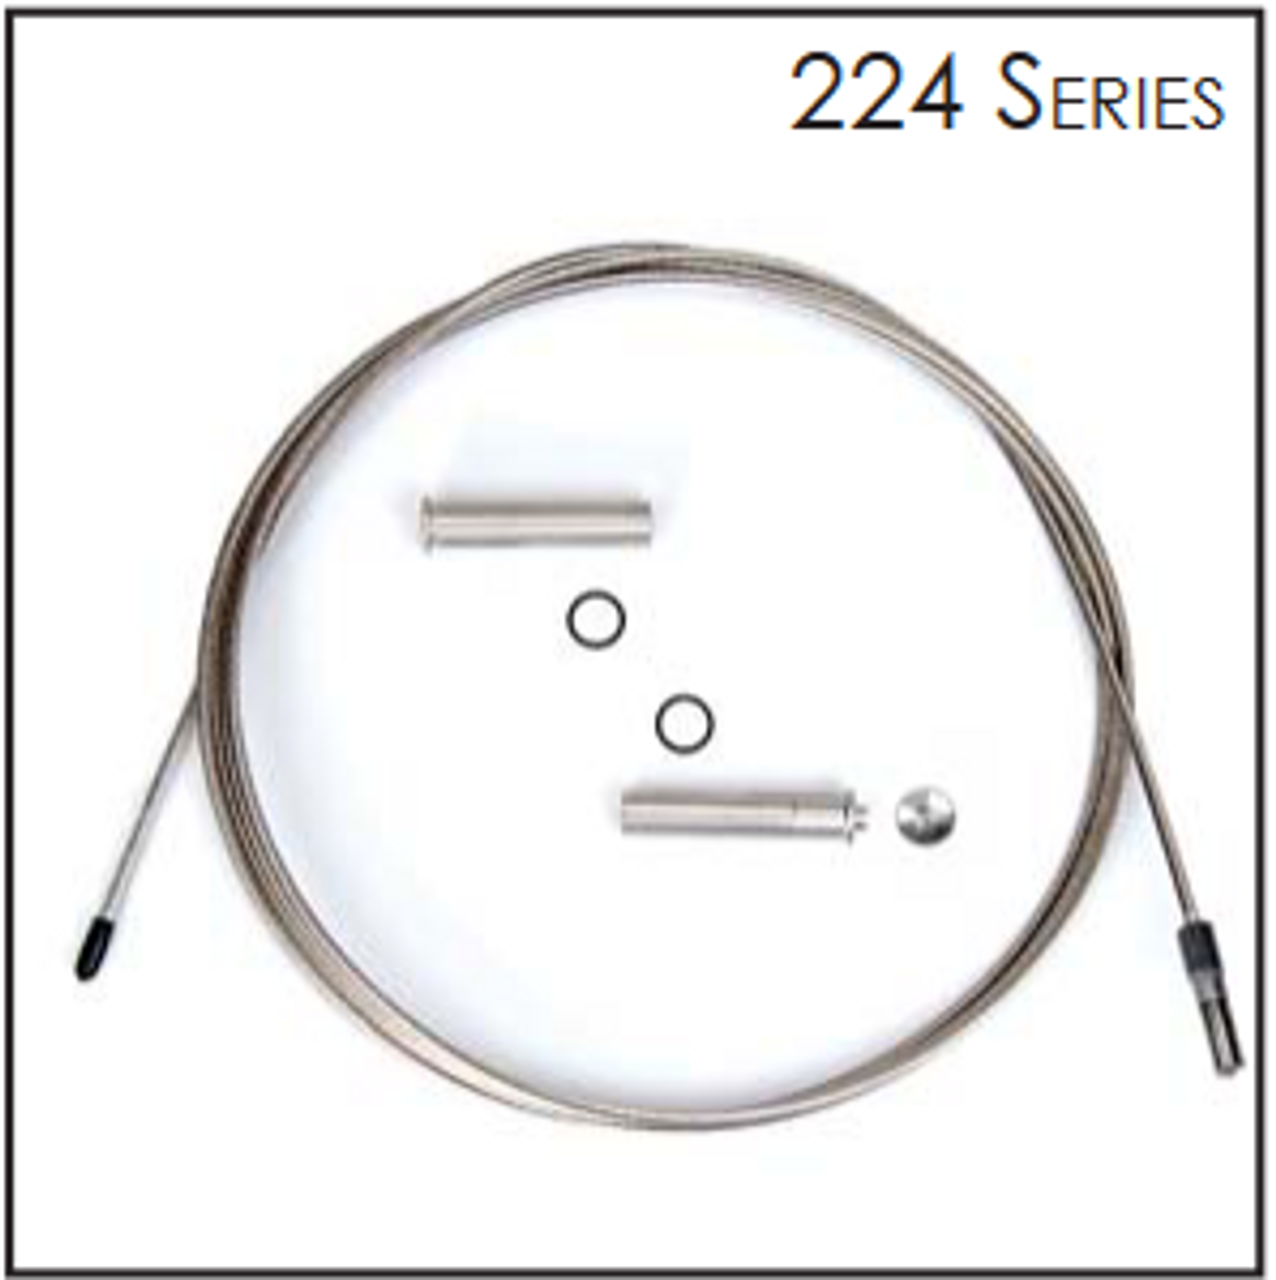 Cable Kit, 5Ft to 70Ft cable Lengths - includes connectors